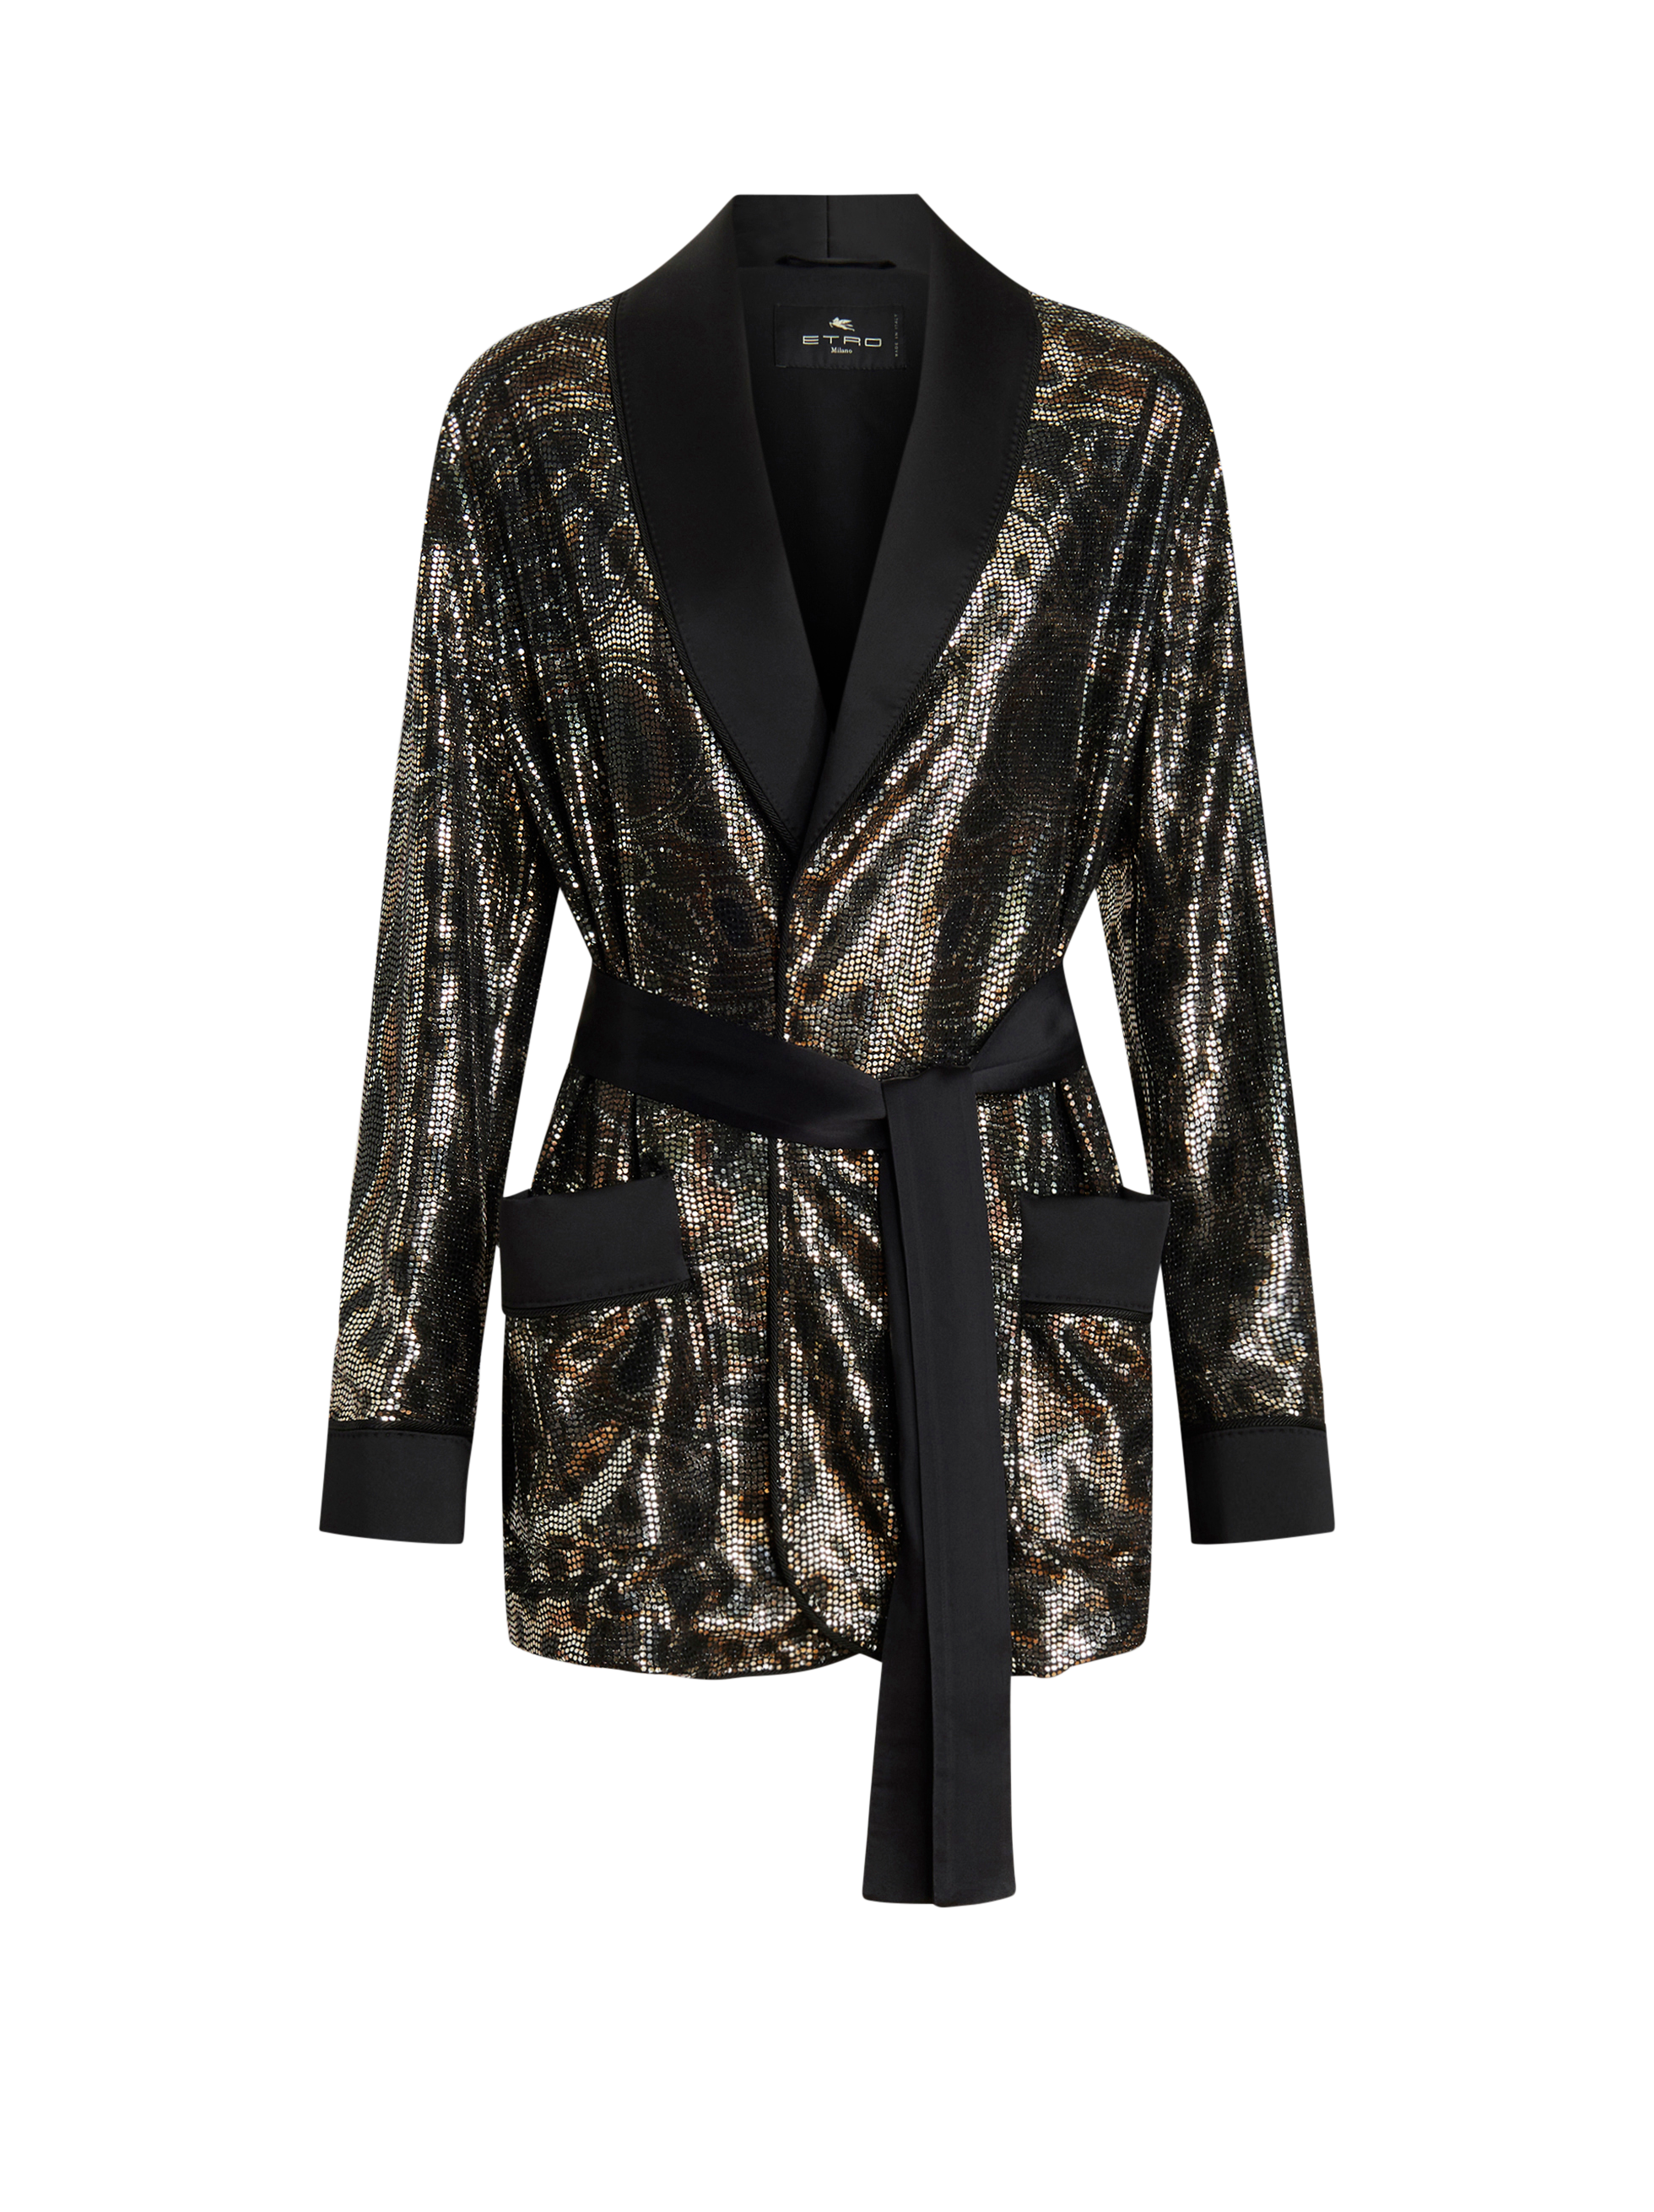 ETRO JACKET WITH MICRO PRINTED SEQUINS